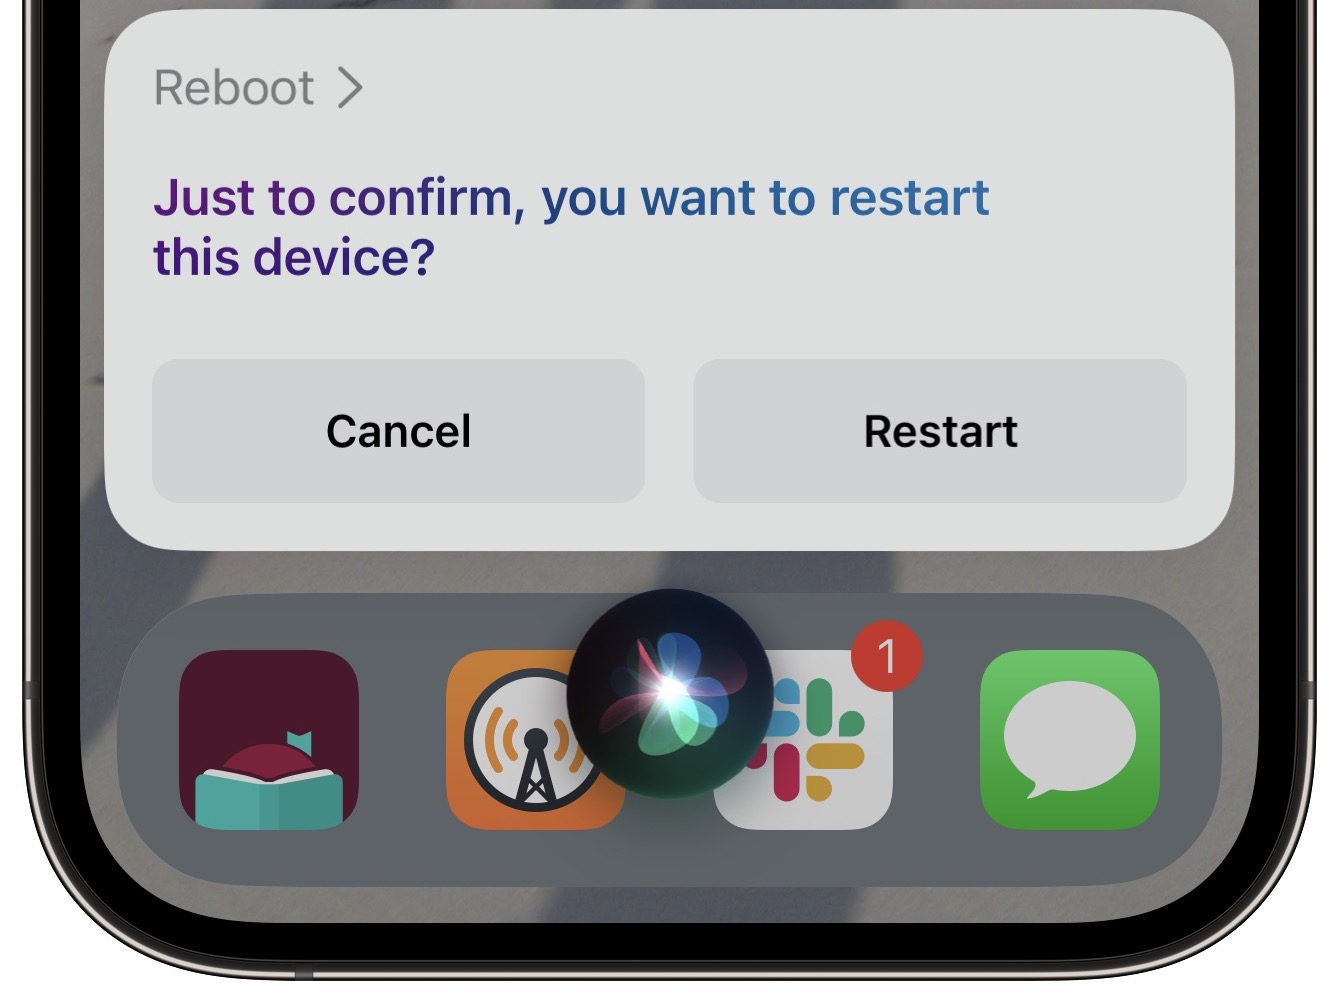 Restart devices with Siri